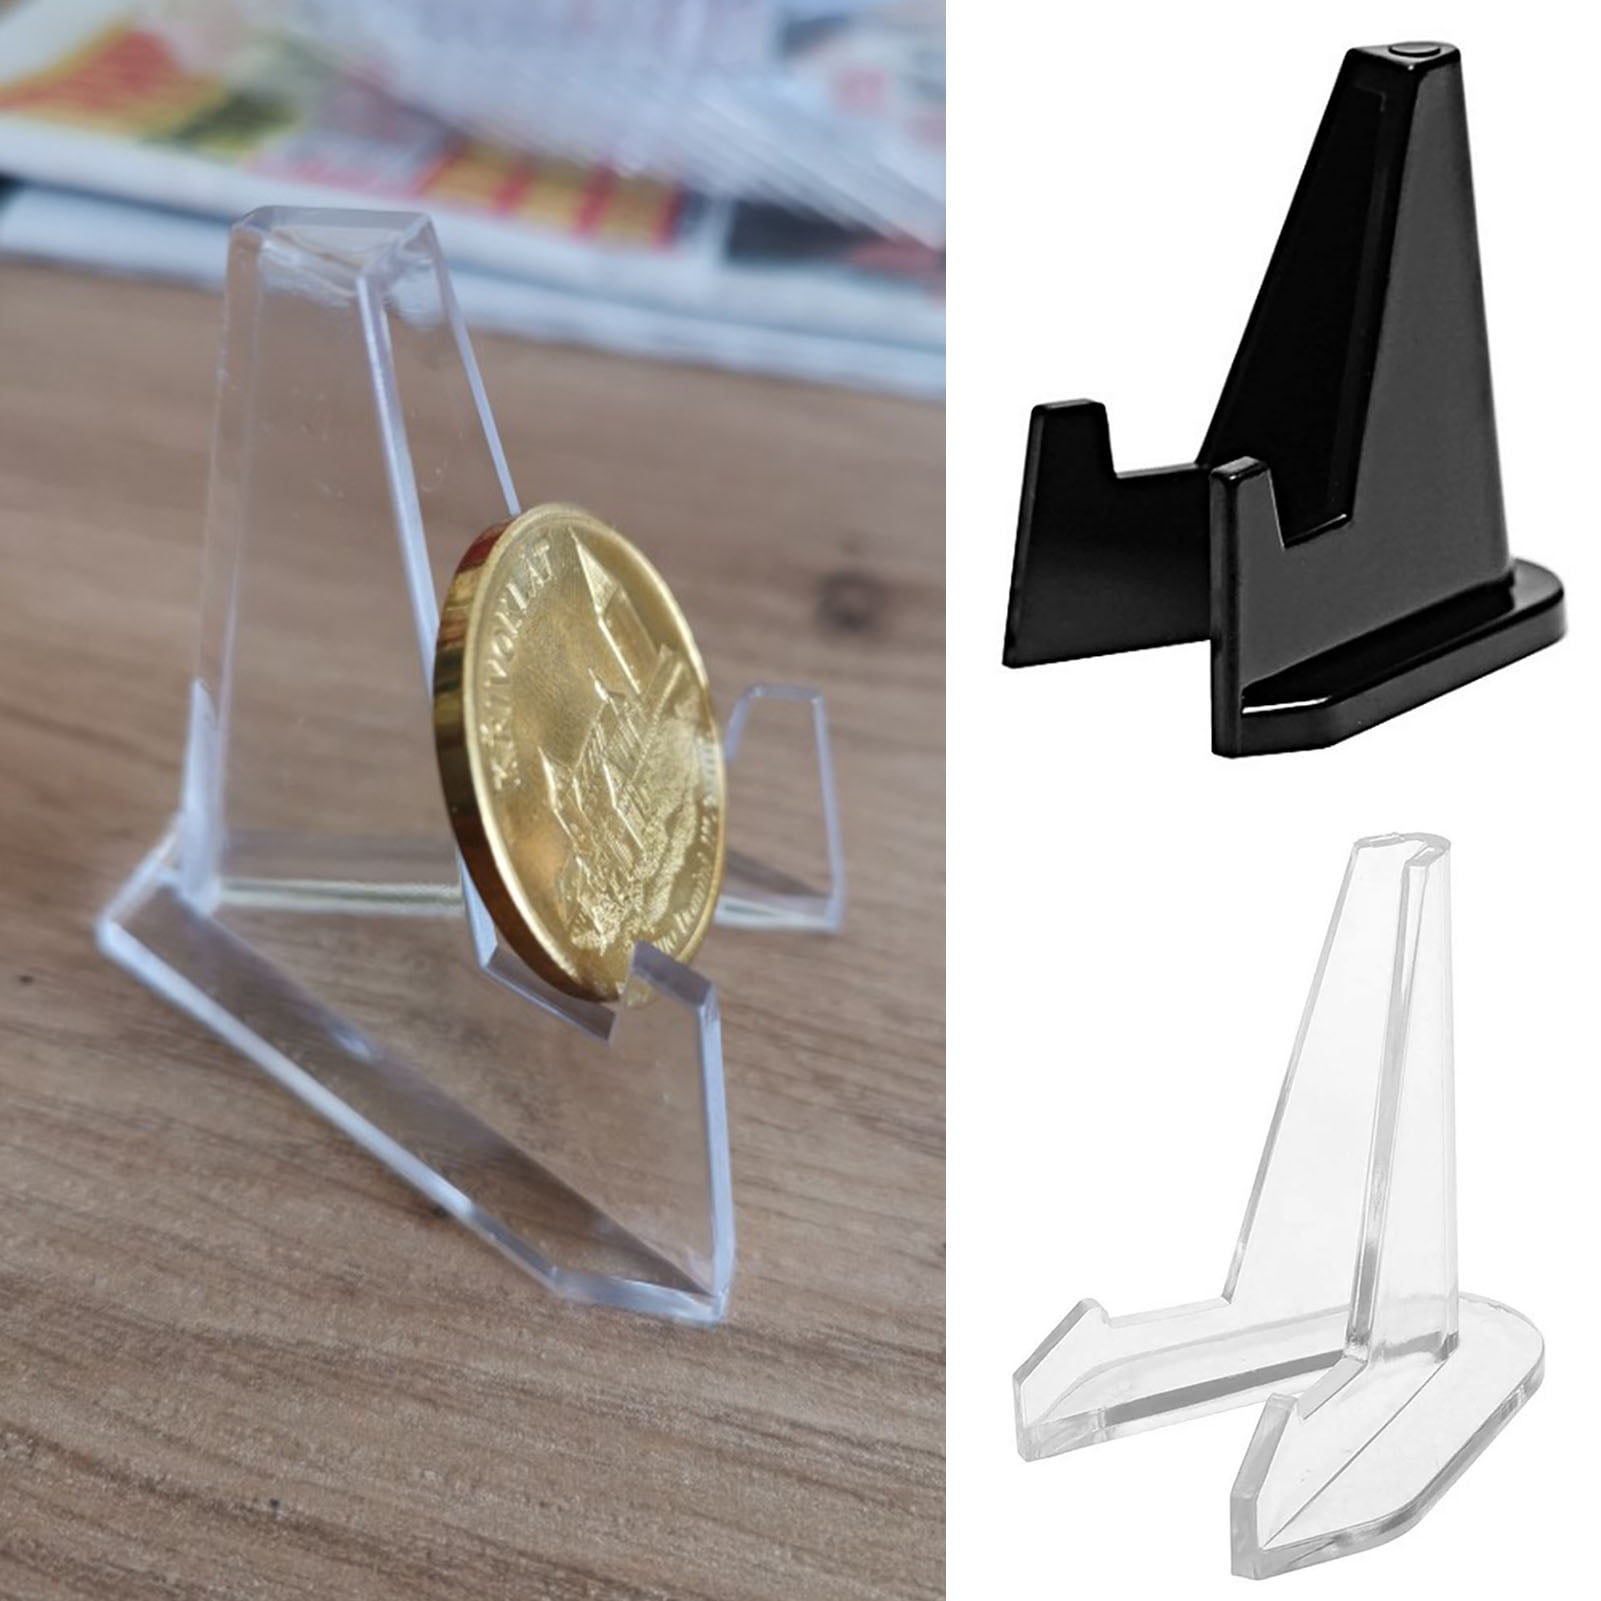 10Pcs Coin Transparent Display Case Acrylic Material Protective Holder Stand 